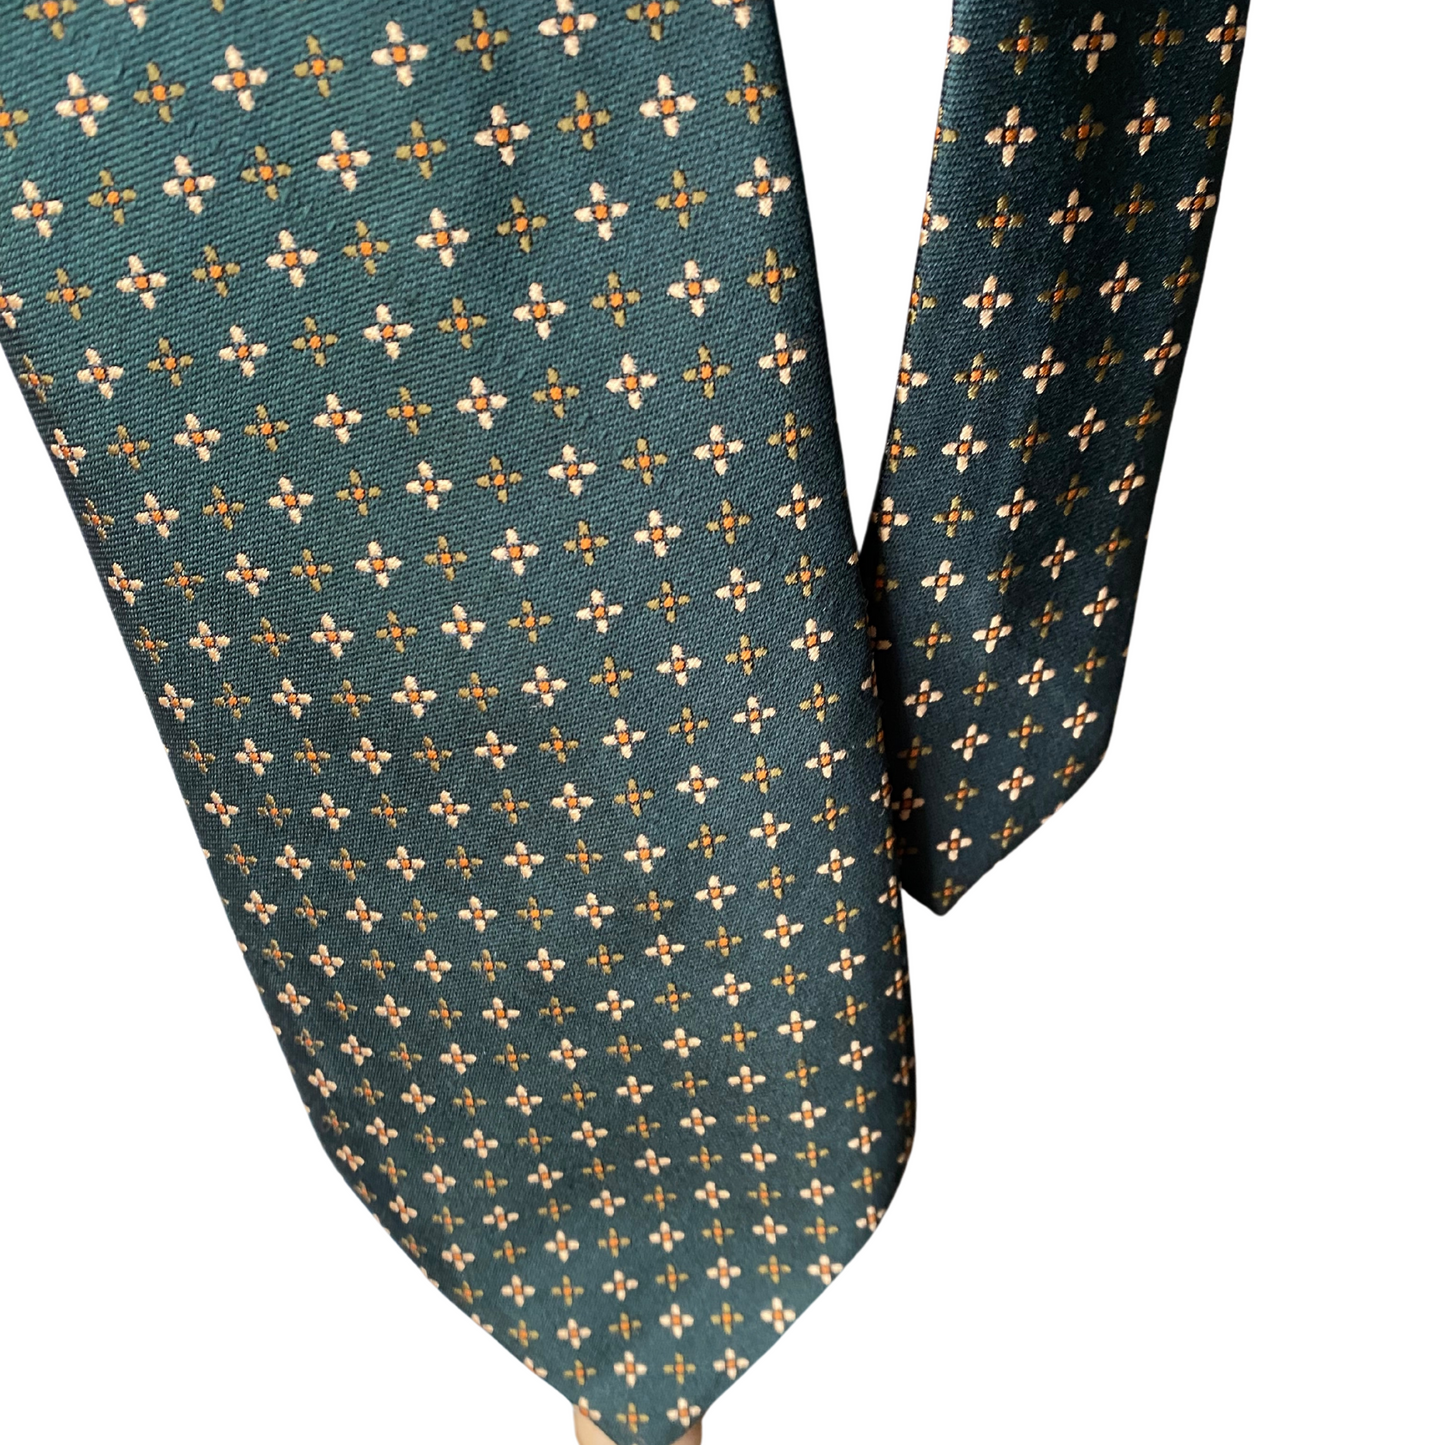 70s Wide Green Vintage Tie with orange, cream and green abstract floral design.